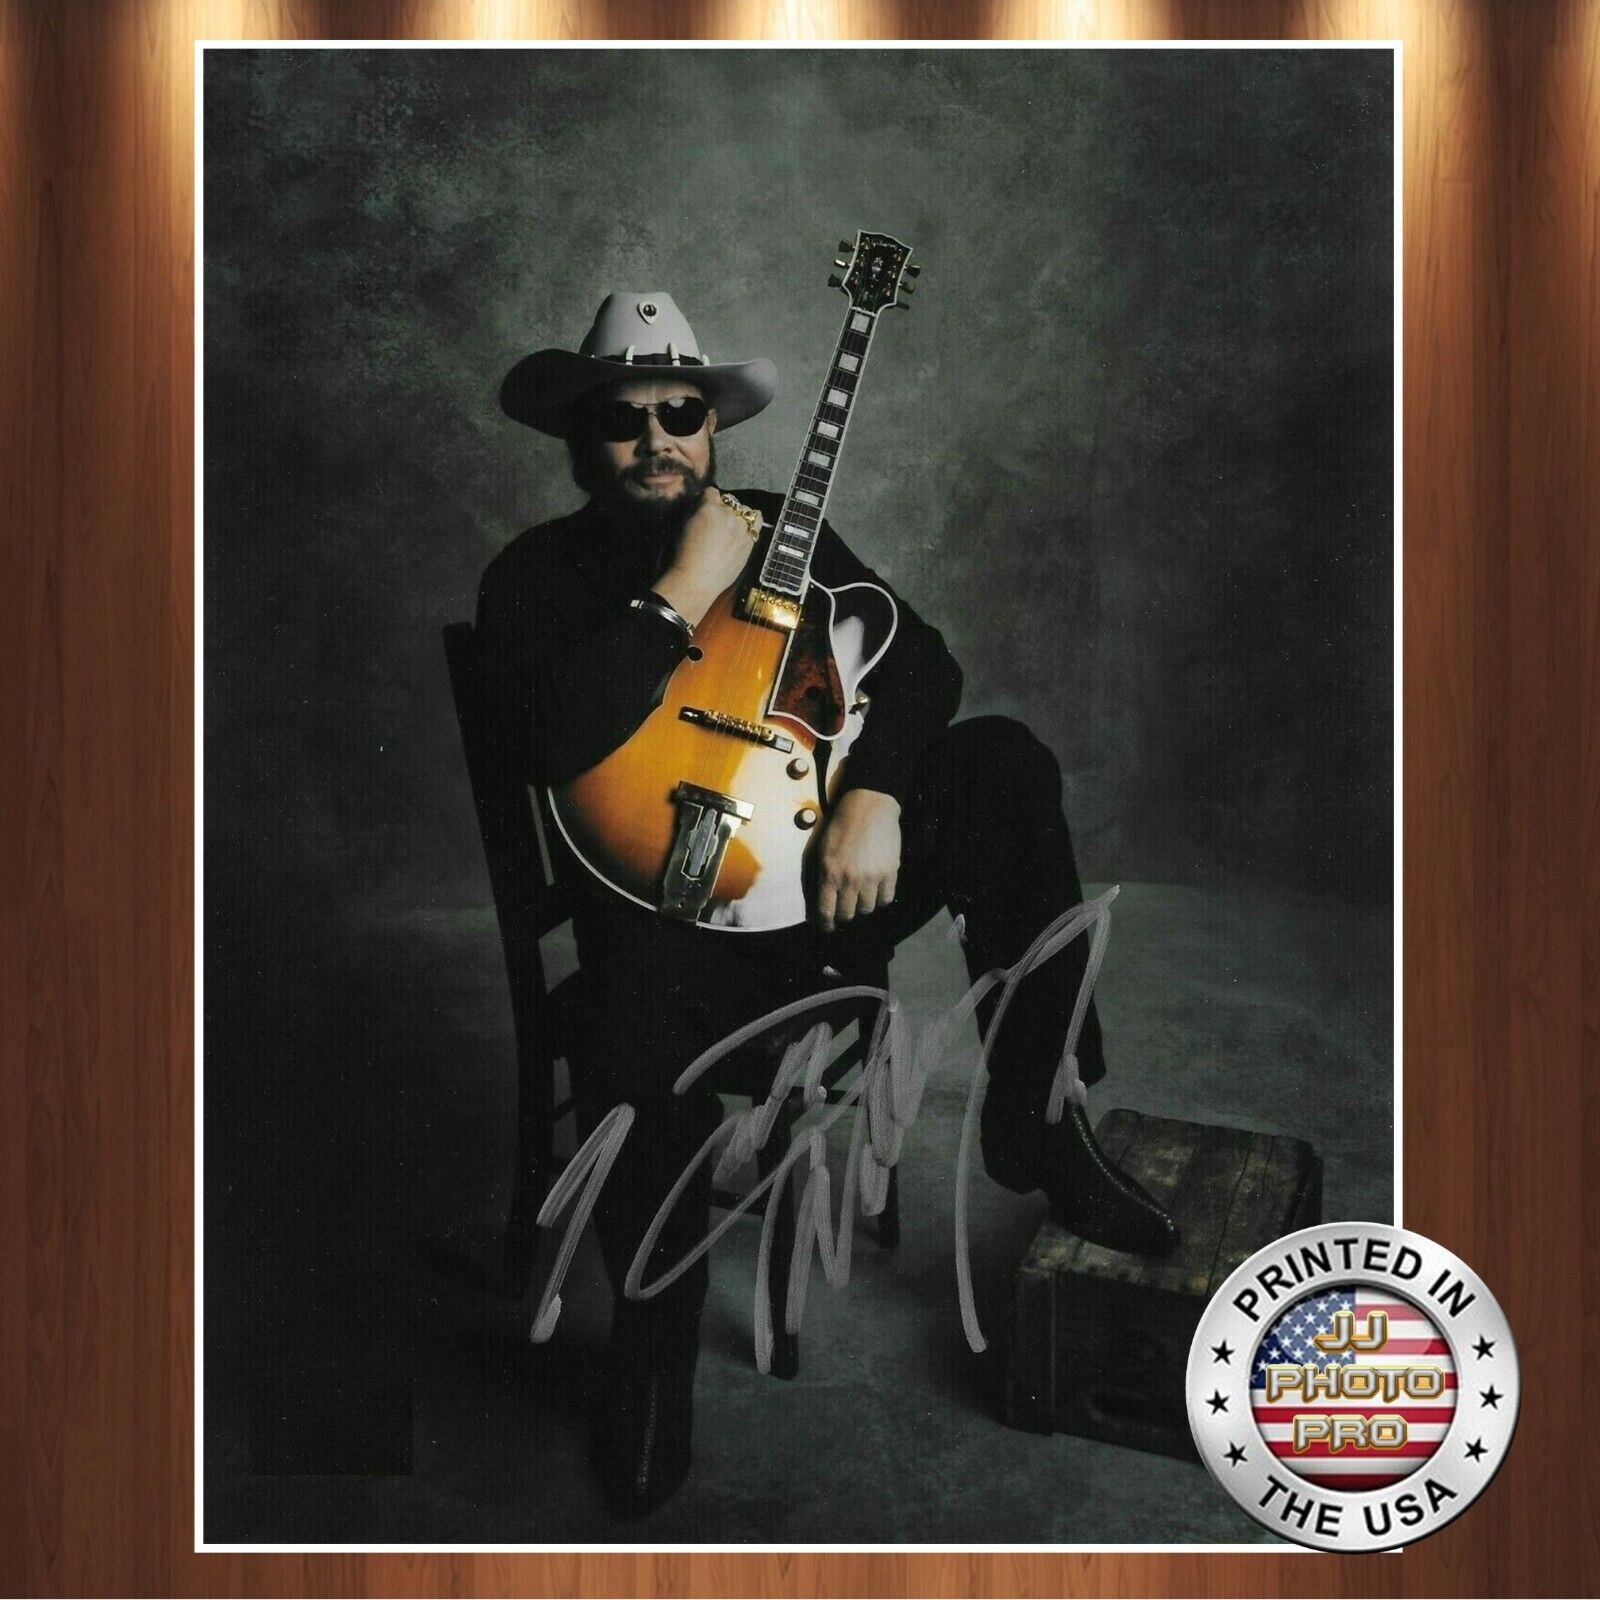 Hank Williams Jr Autographed Signed 8x10 Photo Poster painting REPRINT